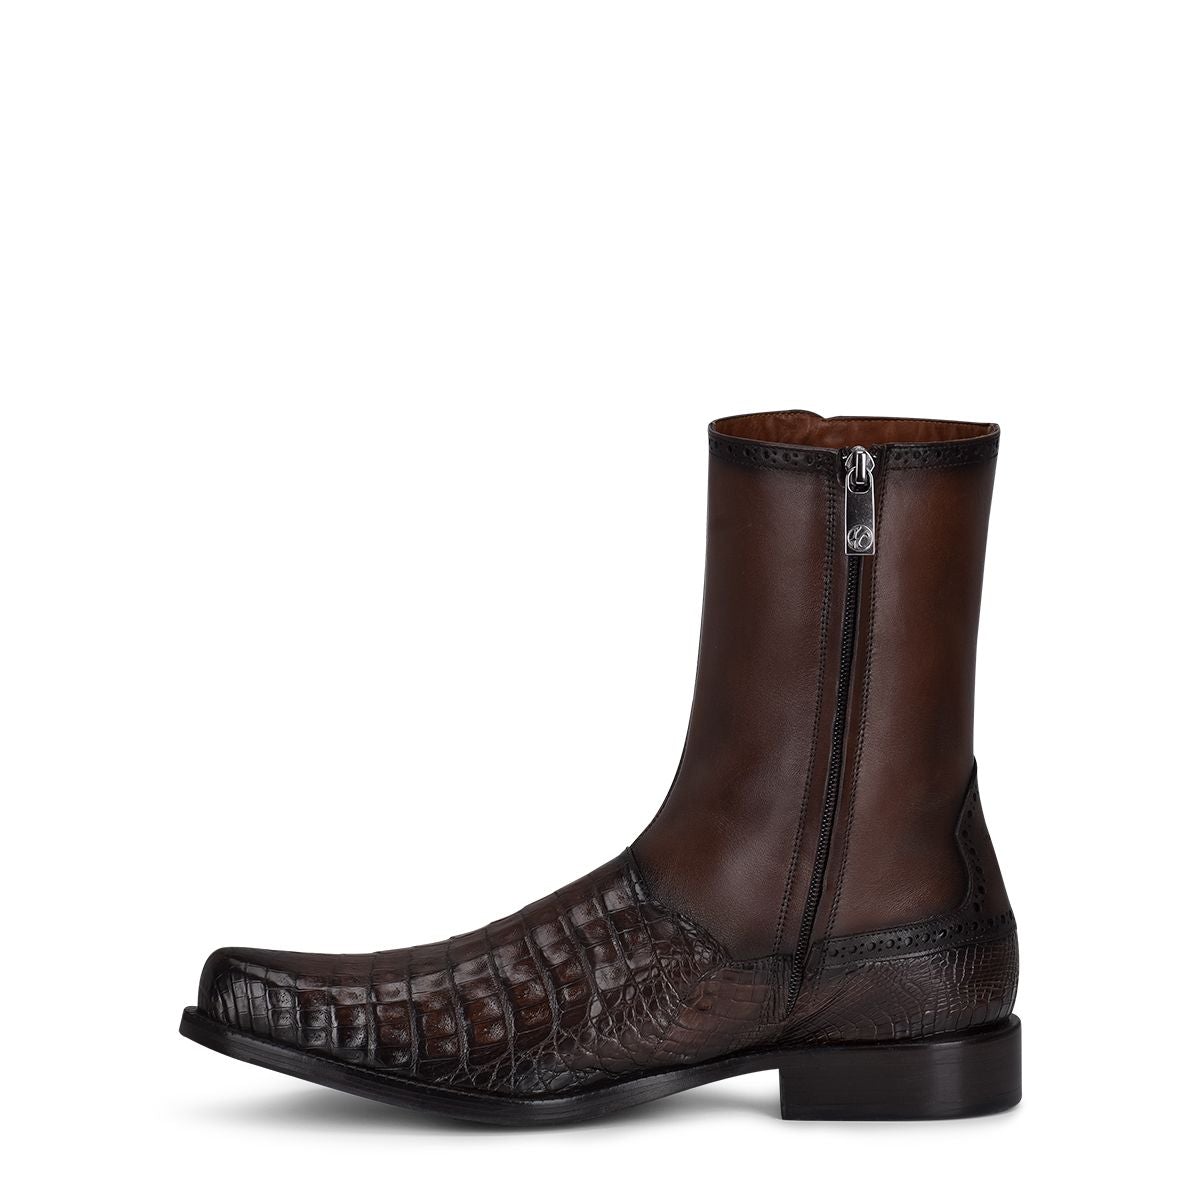 827FWTS - Franco Cuadra brown dress casual caiman leather ankle boots for men-Kuet.us